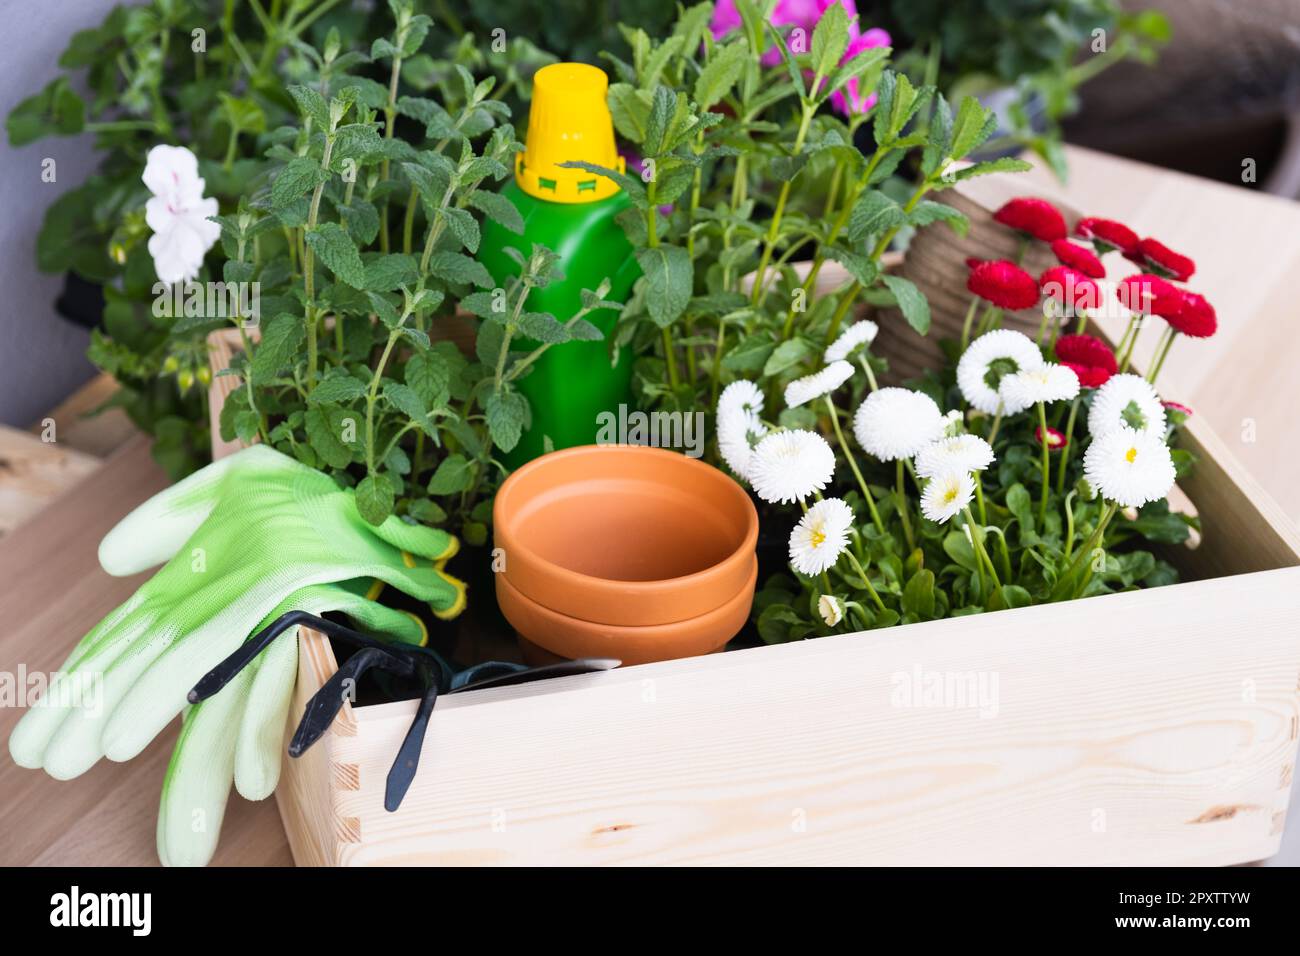 Flower pots for small garden, patio or terrace. Seedlings of spring beautiful flowers and gardening tools in a wooden box. Stock Photo